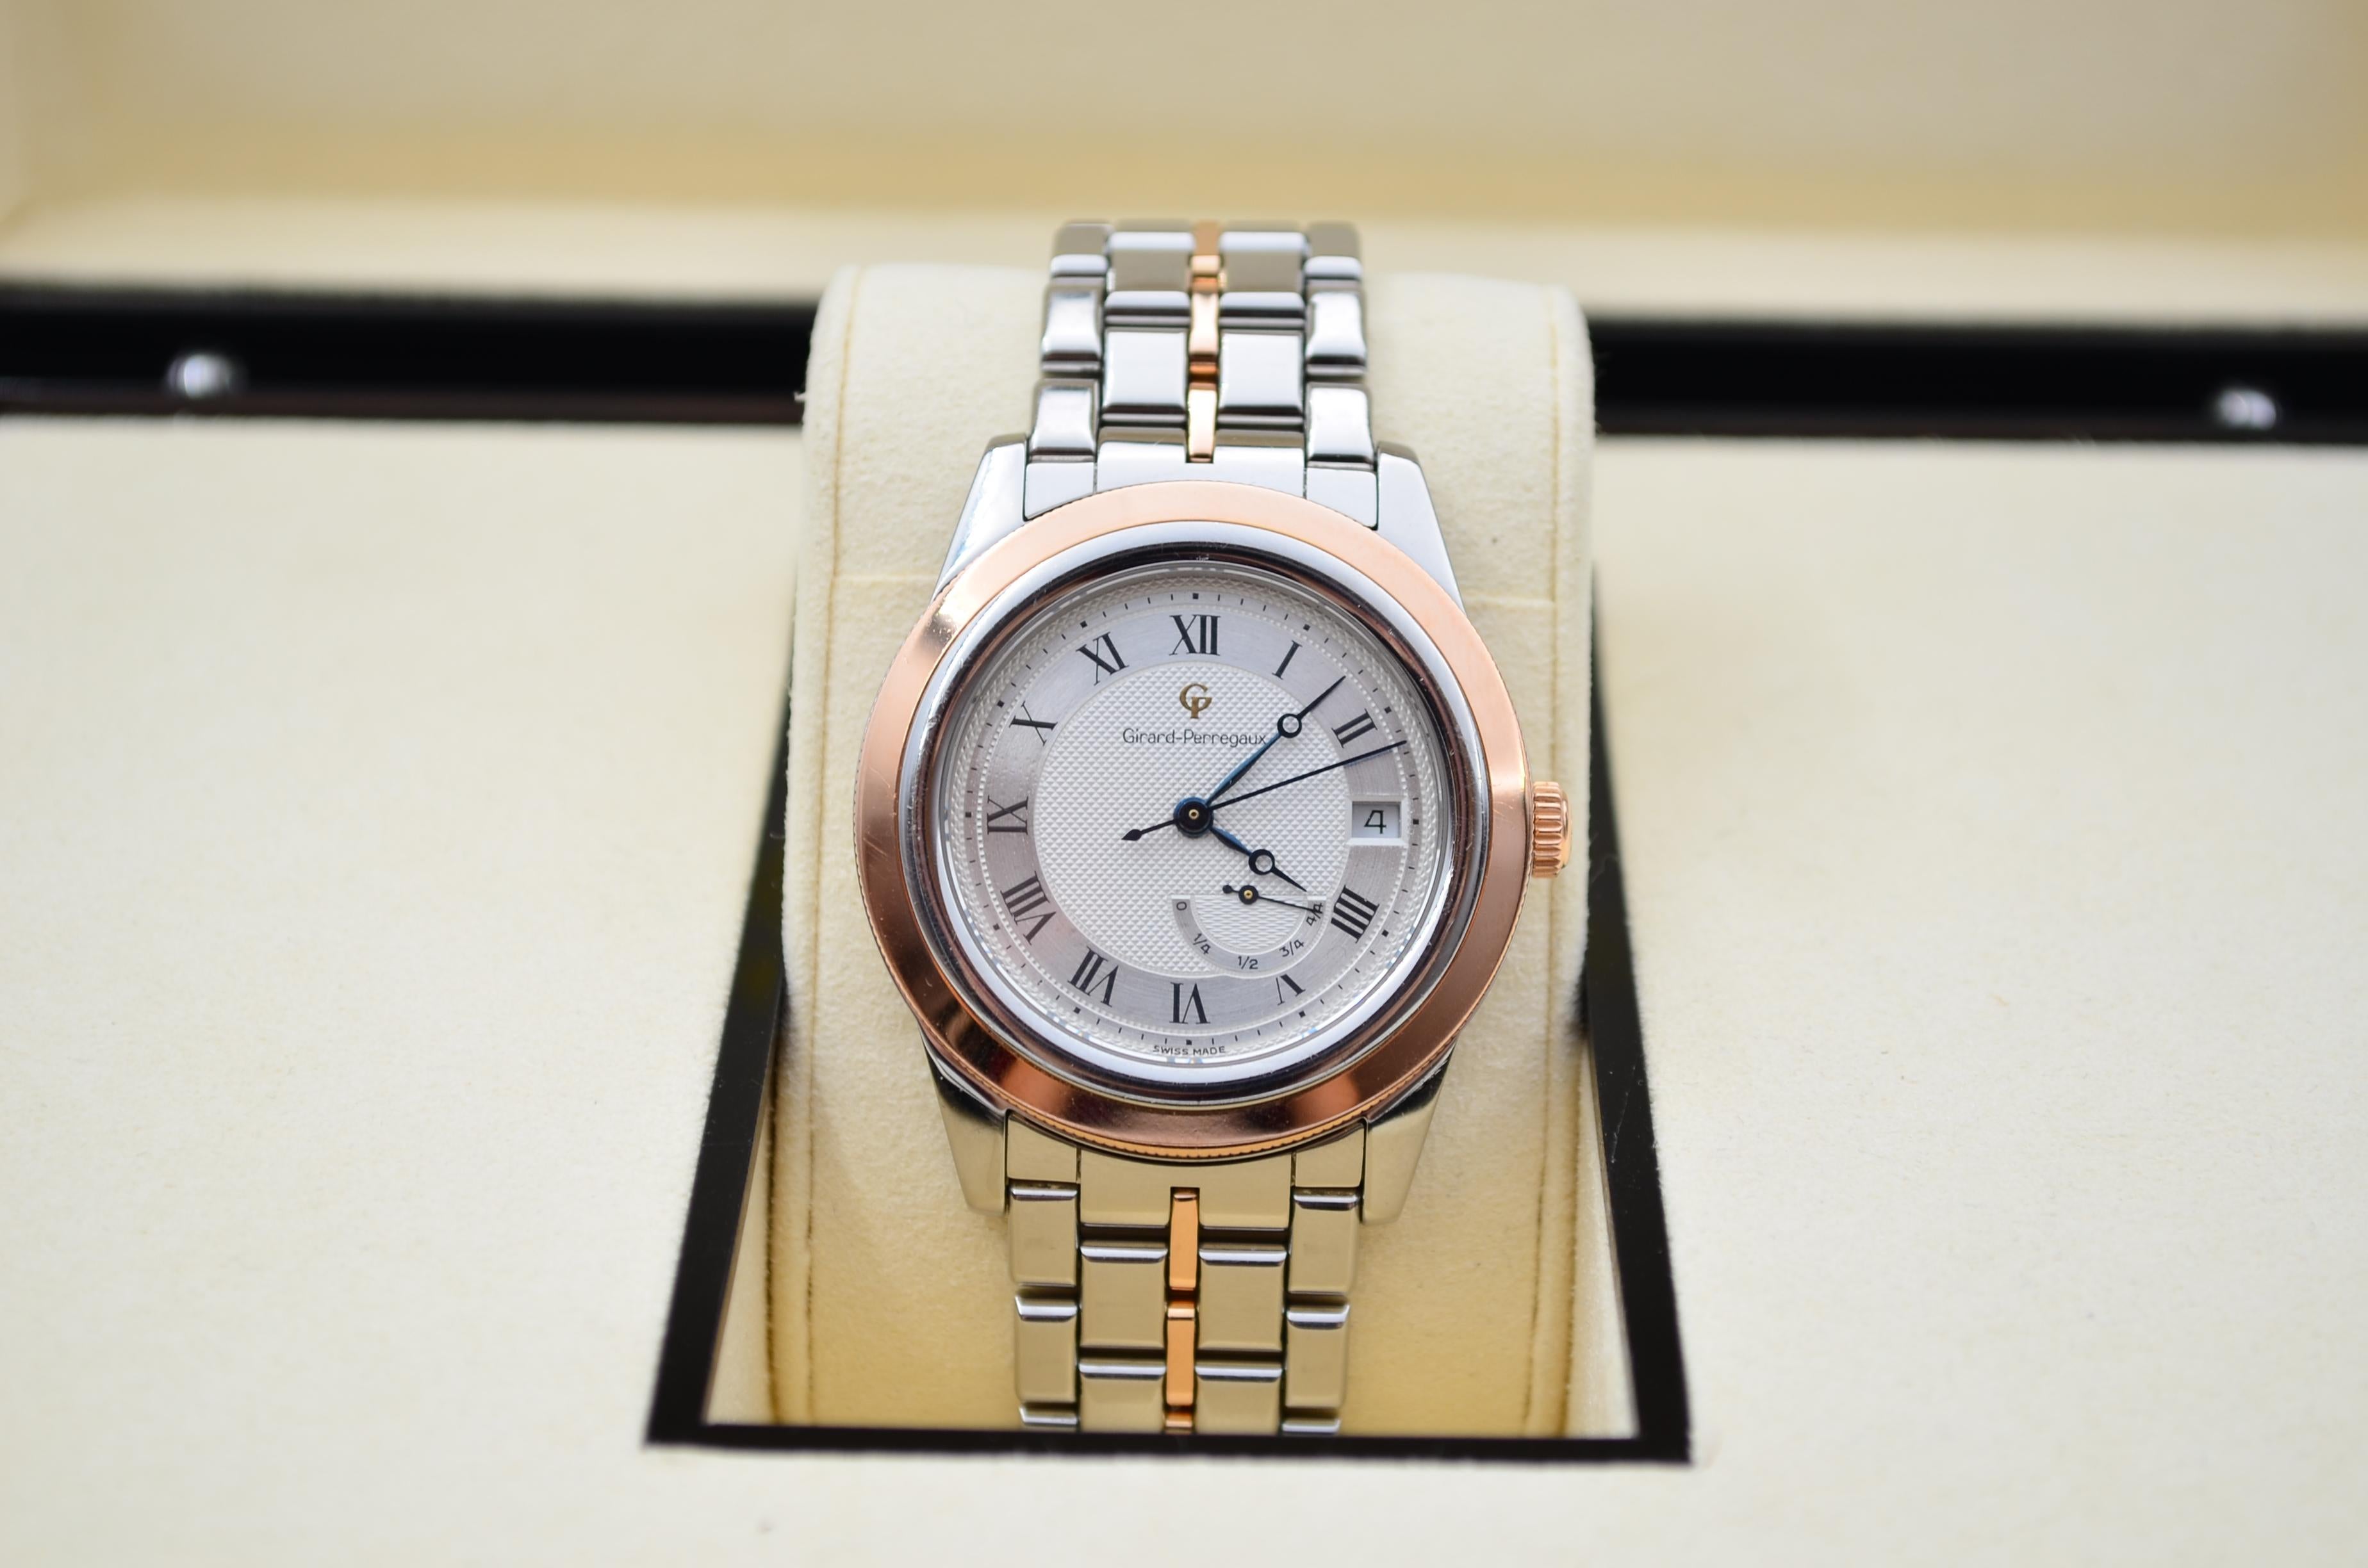 The watch is in a very good condition and it’s working well. It shows slight signs of wear and scratches. The watch comes with an AGS Jewelry wooden box, along with an AGS Jewelry warranty card.  Girard-Perregaux is a prestigious Swiss watchmaking